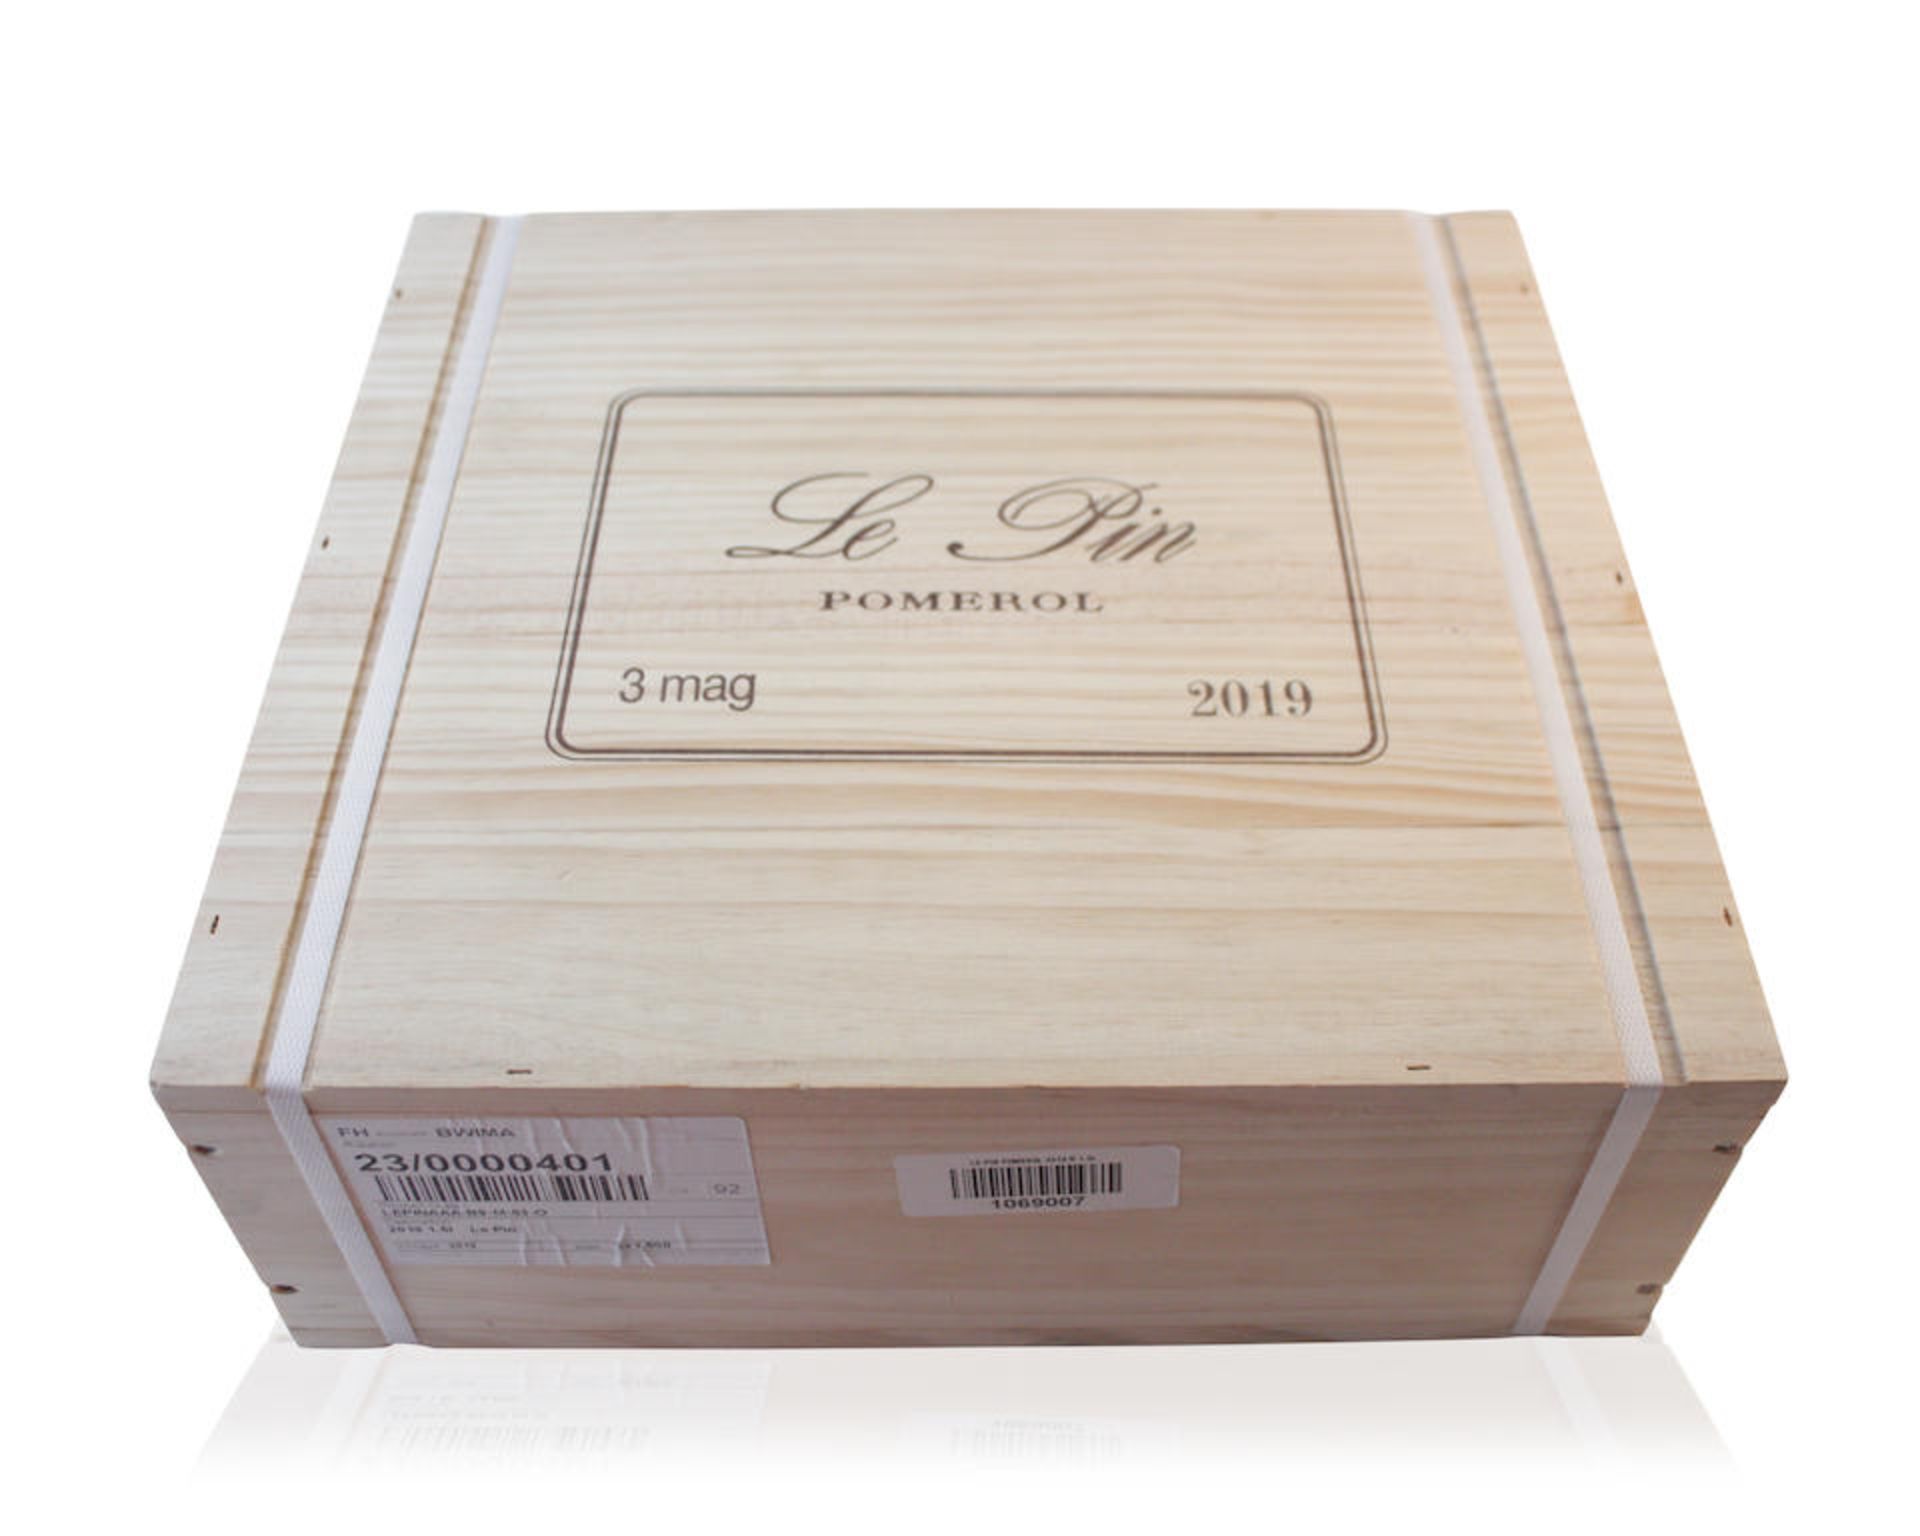 Le Pin 2019, Pomerol (3 magnums)